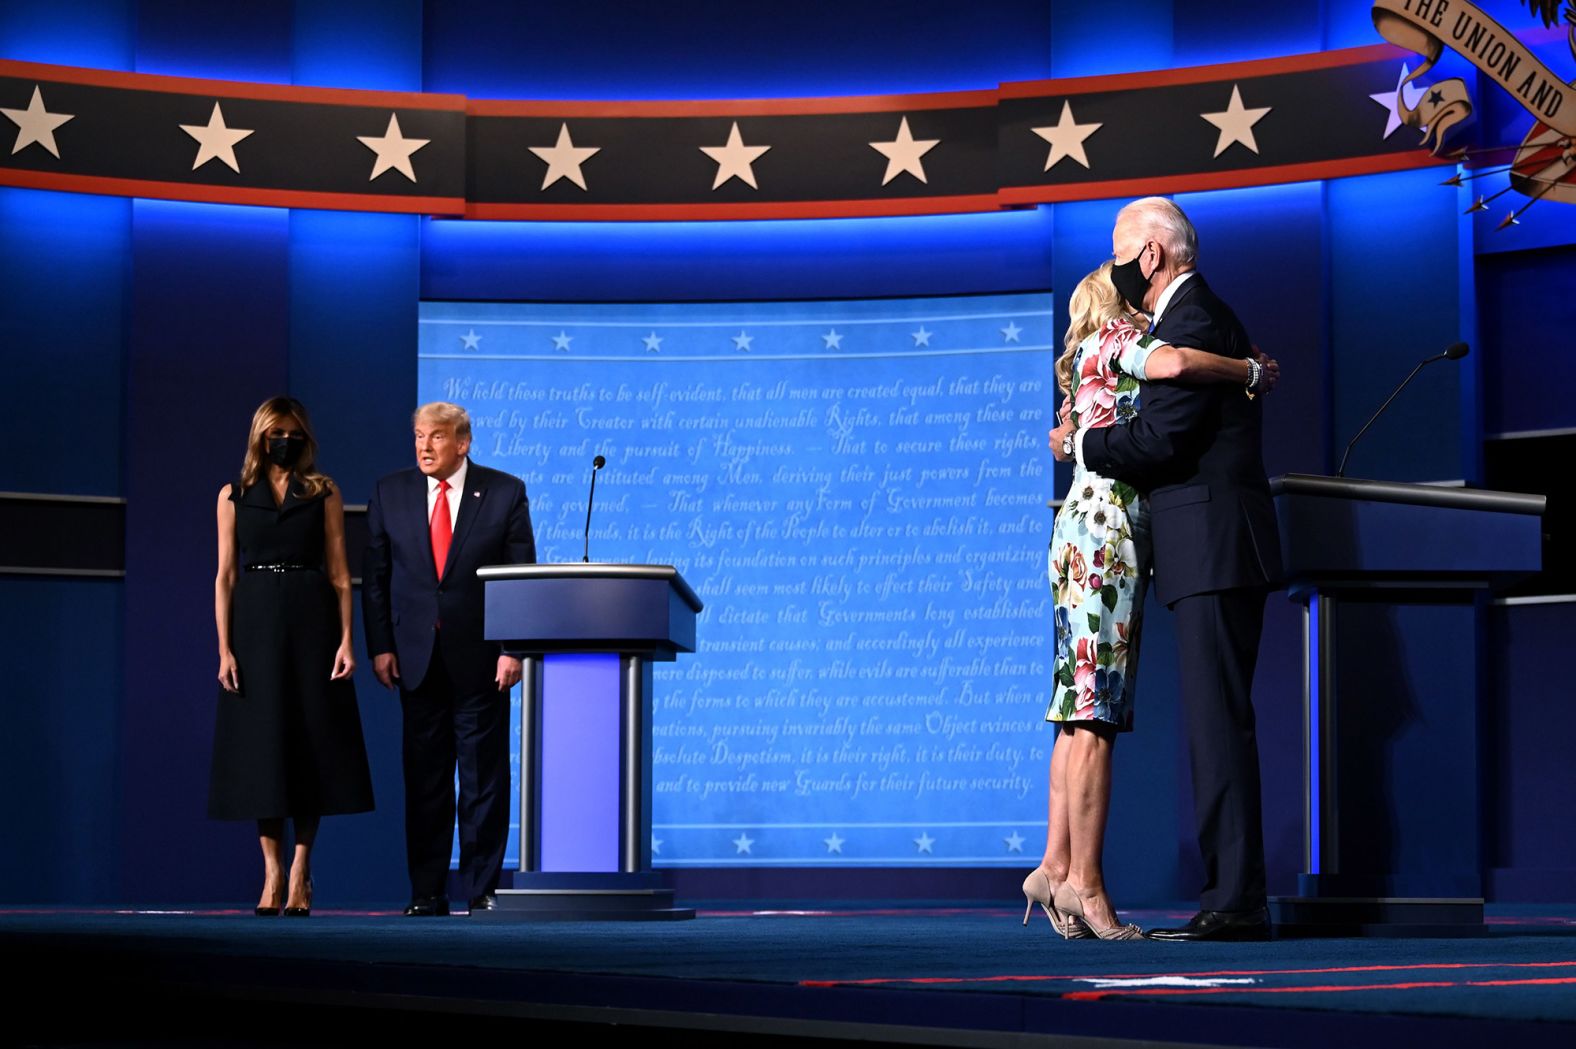 Trump and Biden are joined by their spouses at the end of the debate.